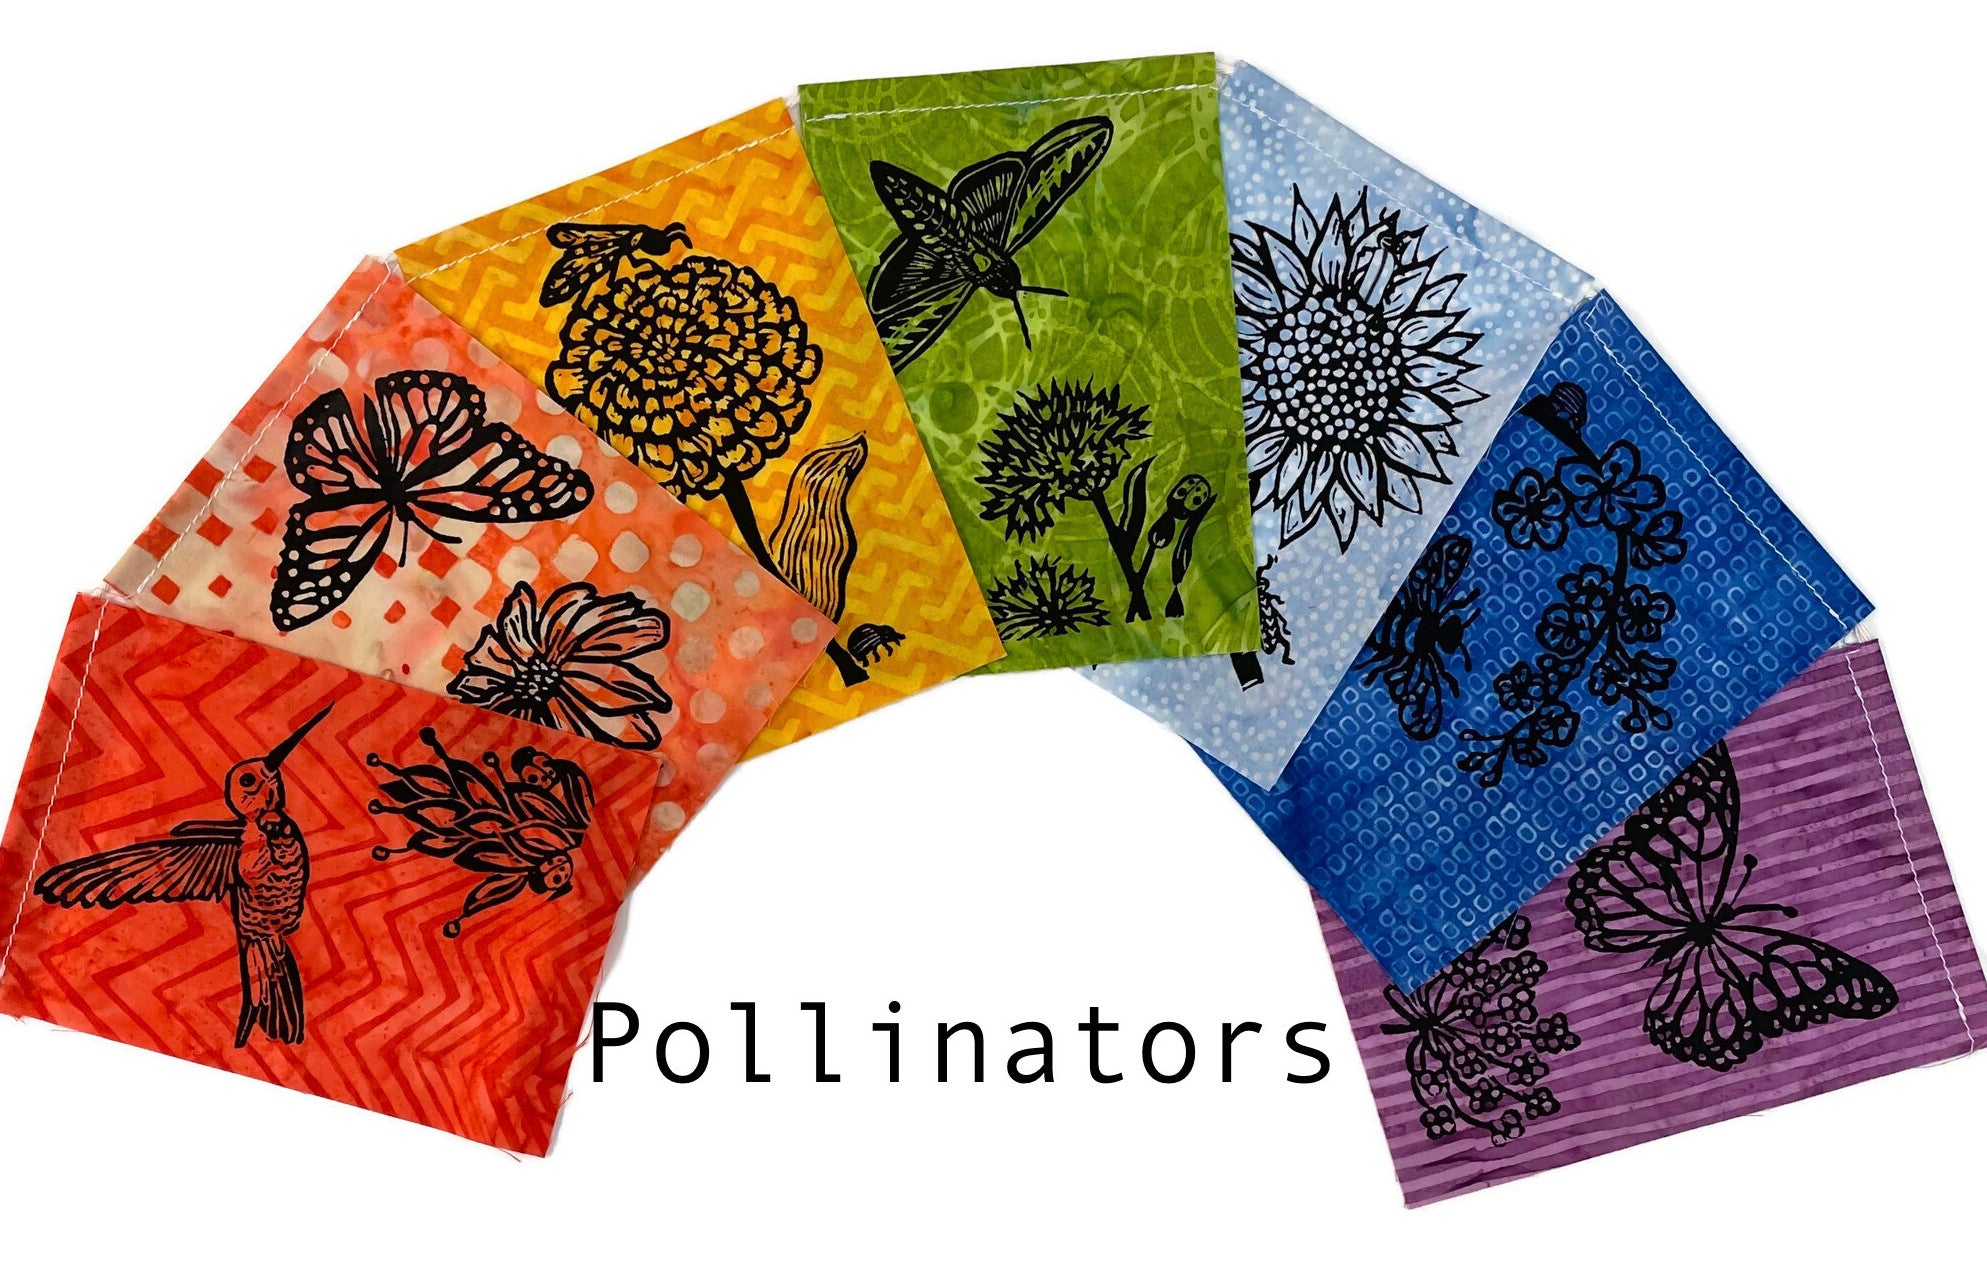 Small Flag Set with images of pollinators handprinted on them